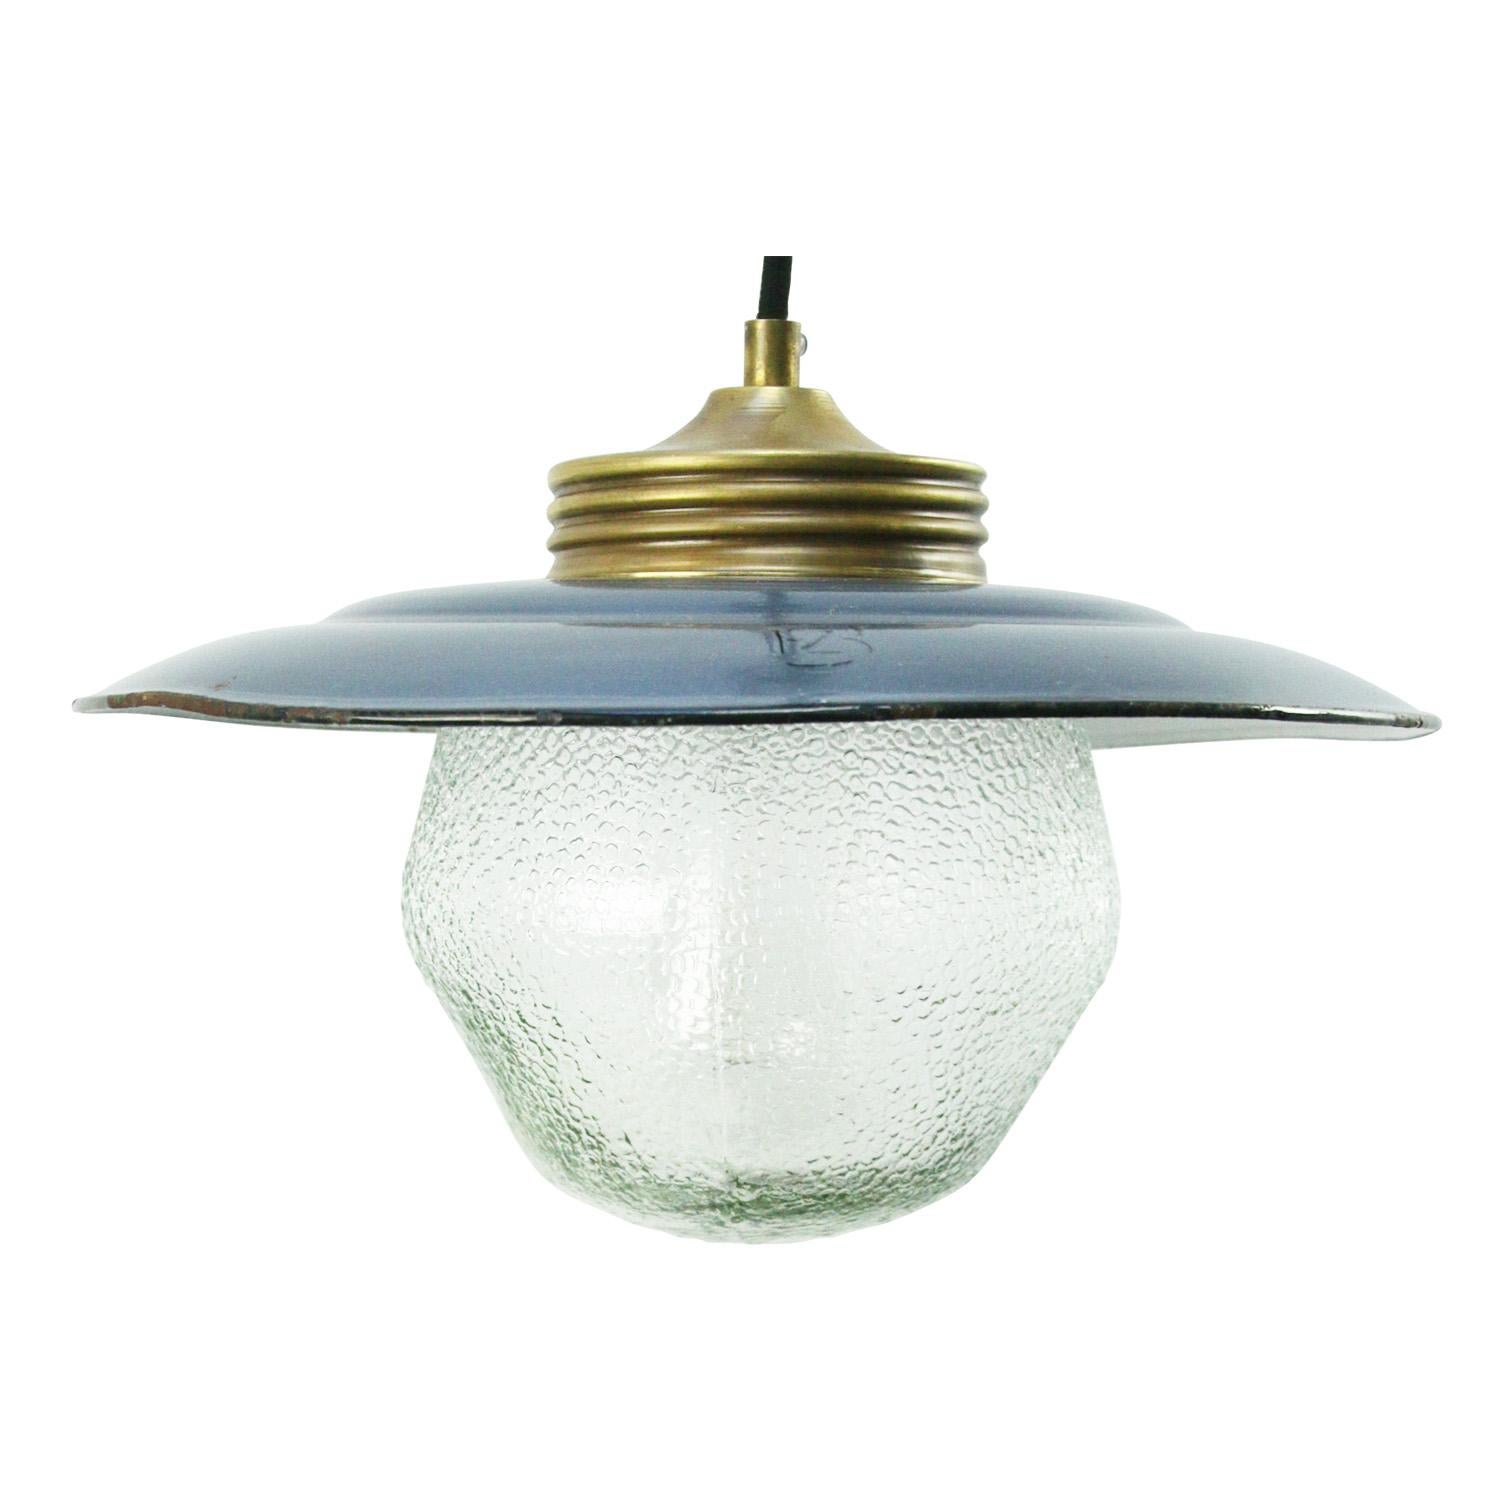 Blue enamel industrial hanging lamp.
Frosted glass with brass top.

Weight: 2.40 kg / 5.3 lb

Priced per individual item. All lamps have been made suitable by international standards for incandescent light bulbs, energy-efficient and LED bulbs.